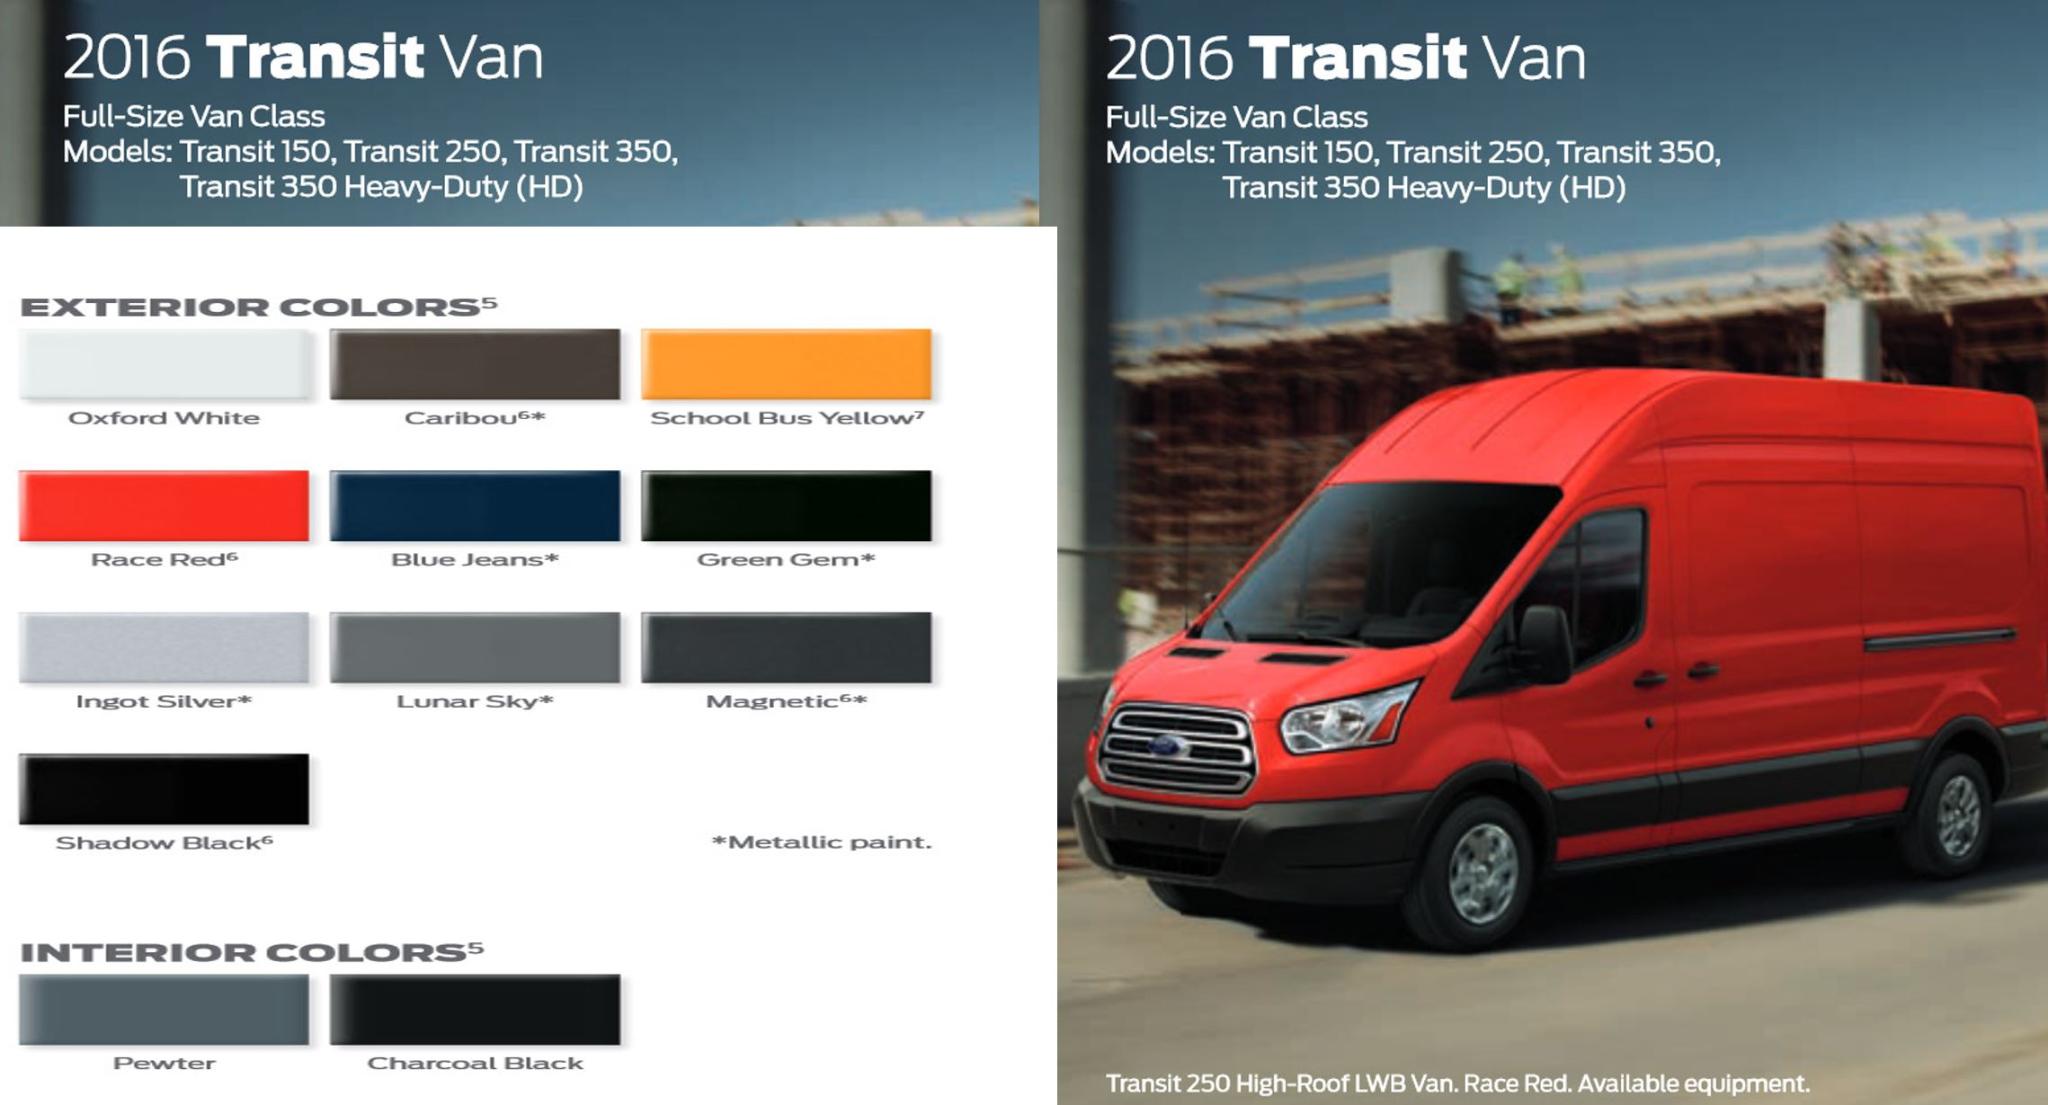 colors the Ford Transit came in with paint codes, color names and the vehicle example